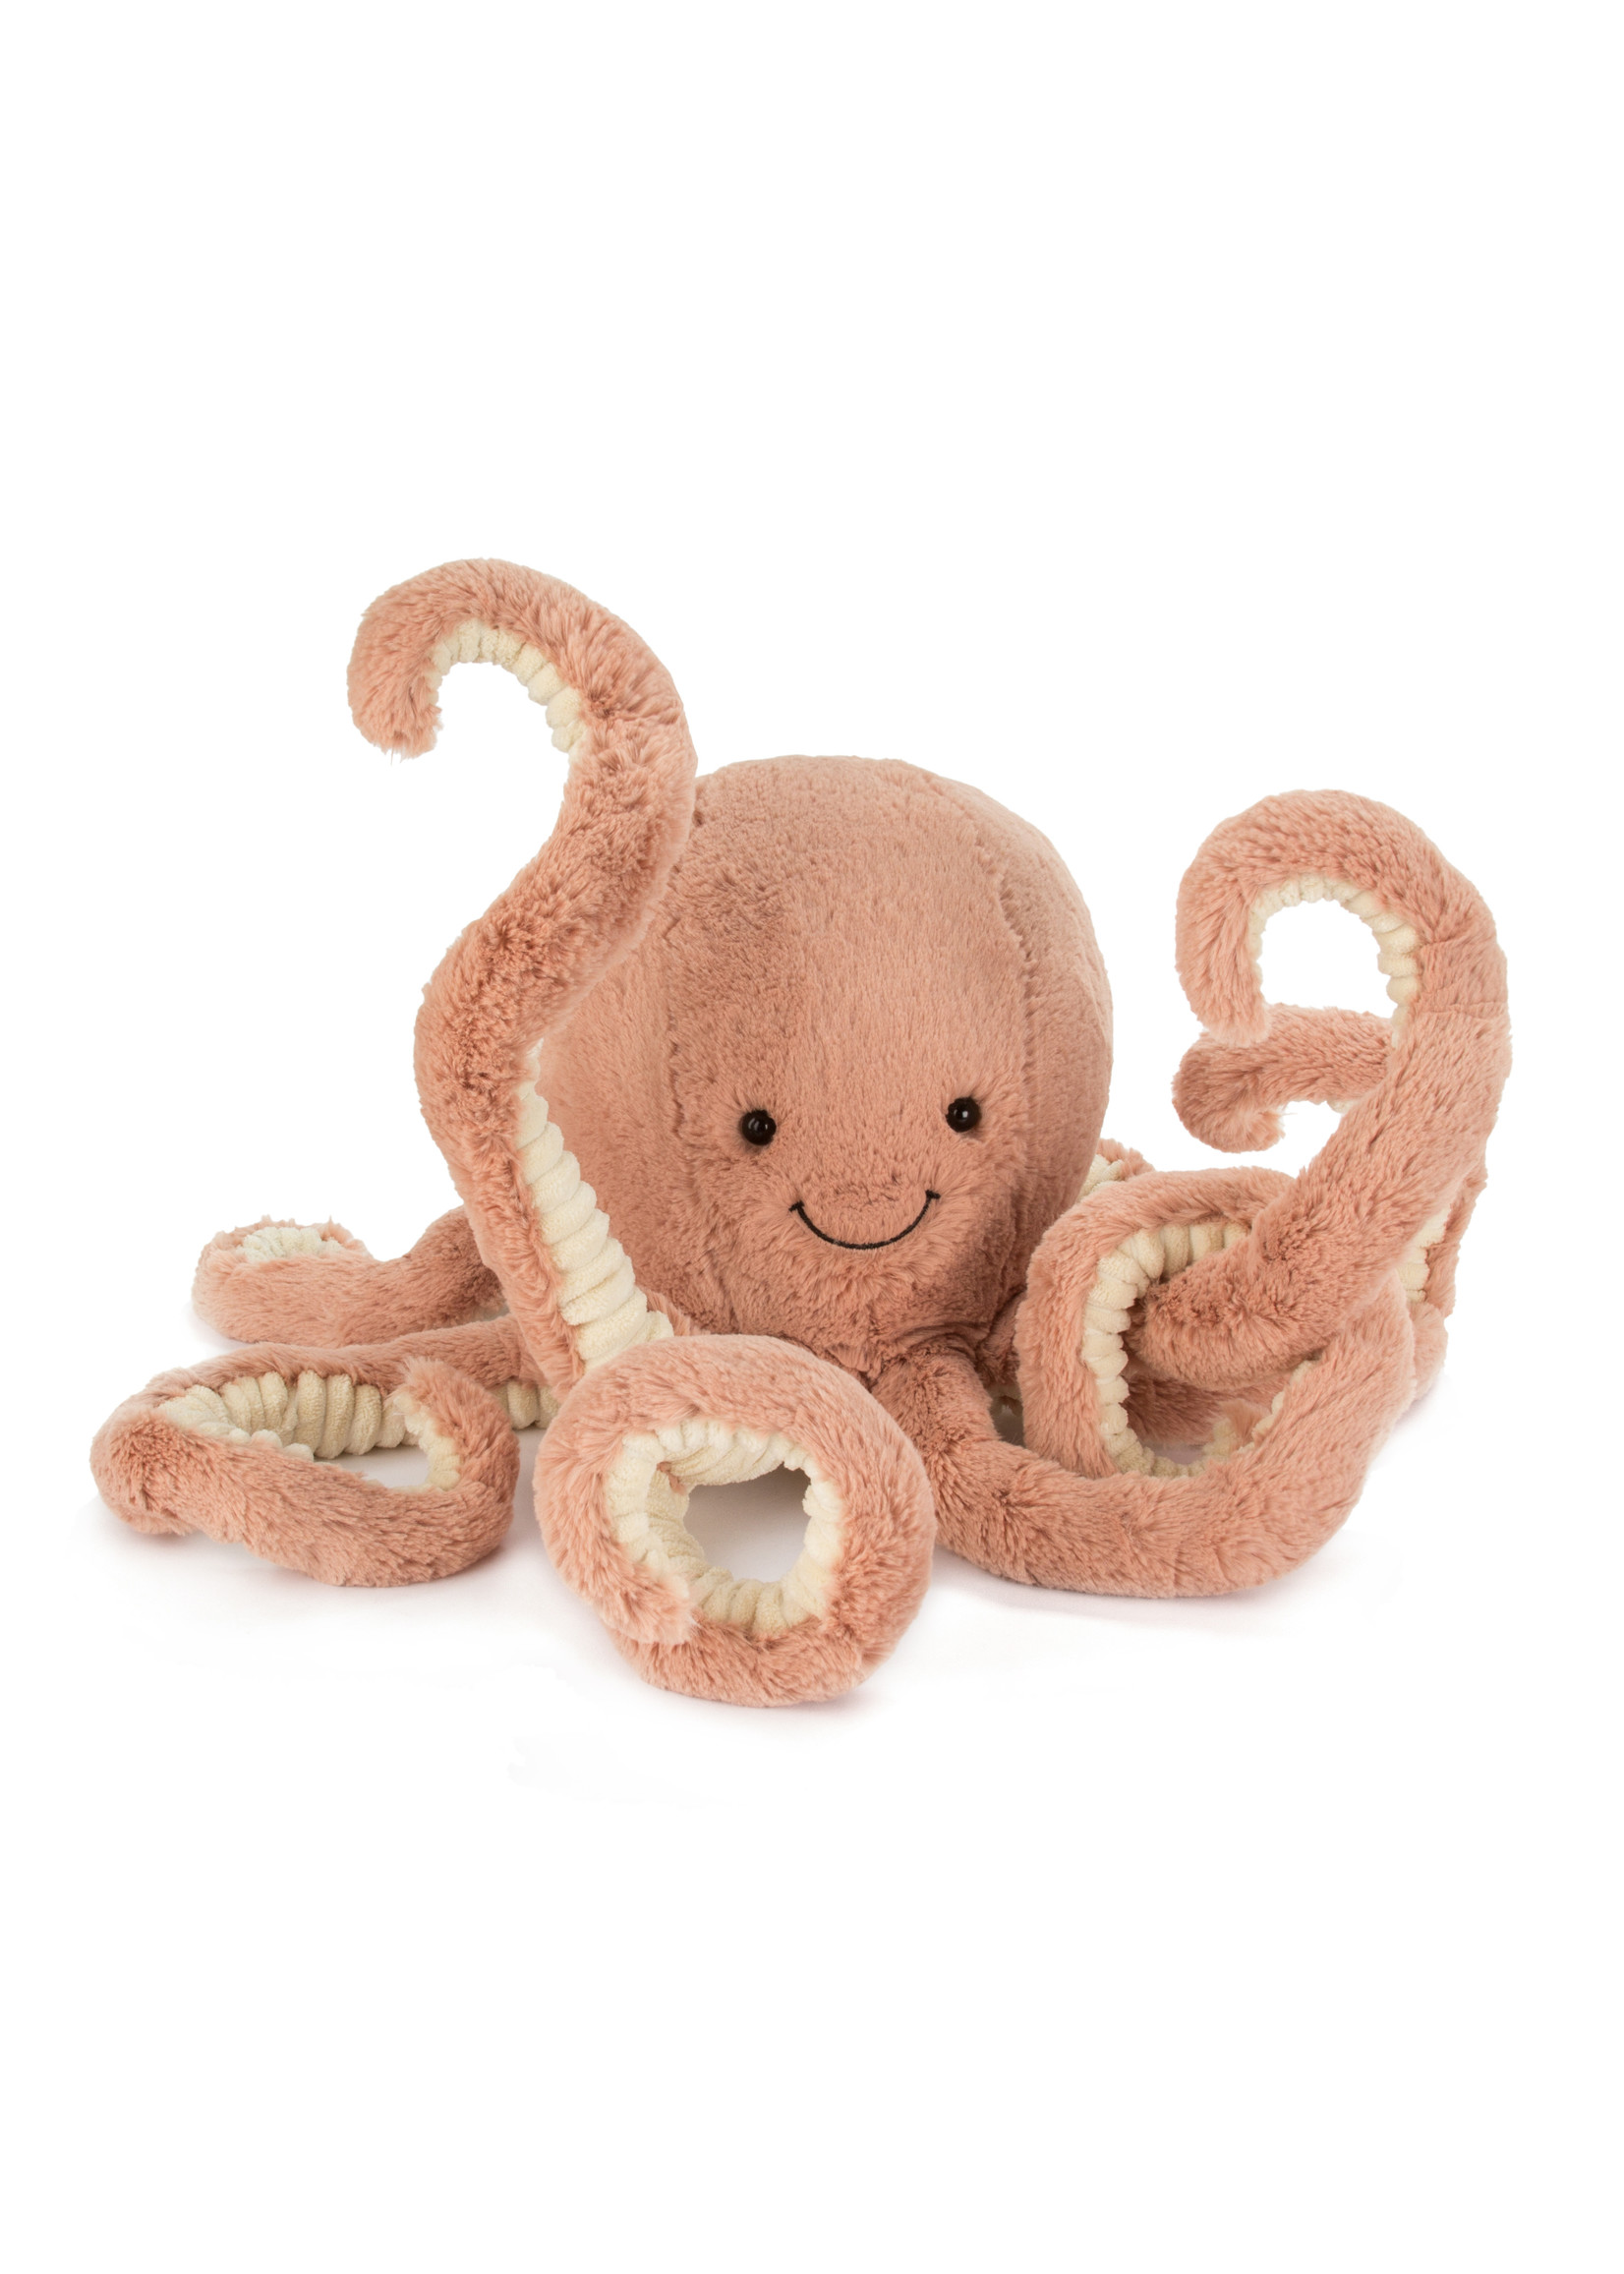 Jellycat Odell Octopus - Small